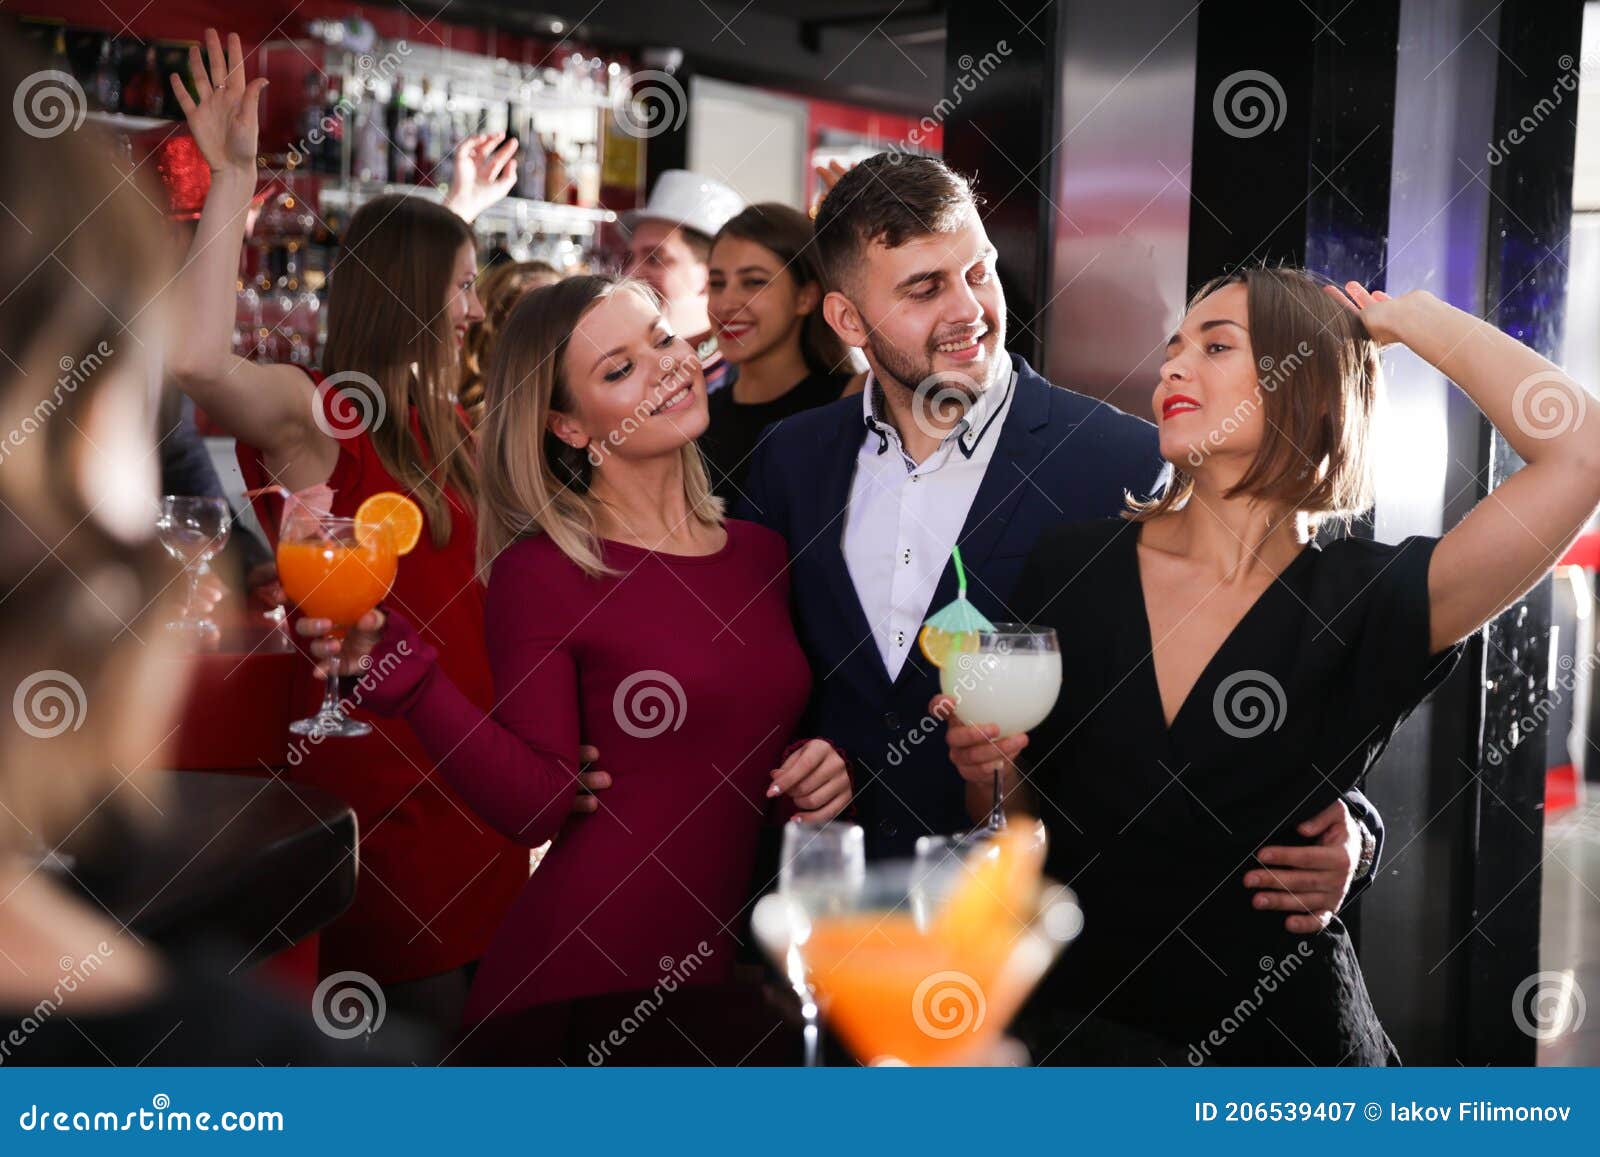 Man and Two Women at Nightclub Stock Image - Image of clubbing, cliques ...